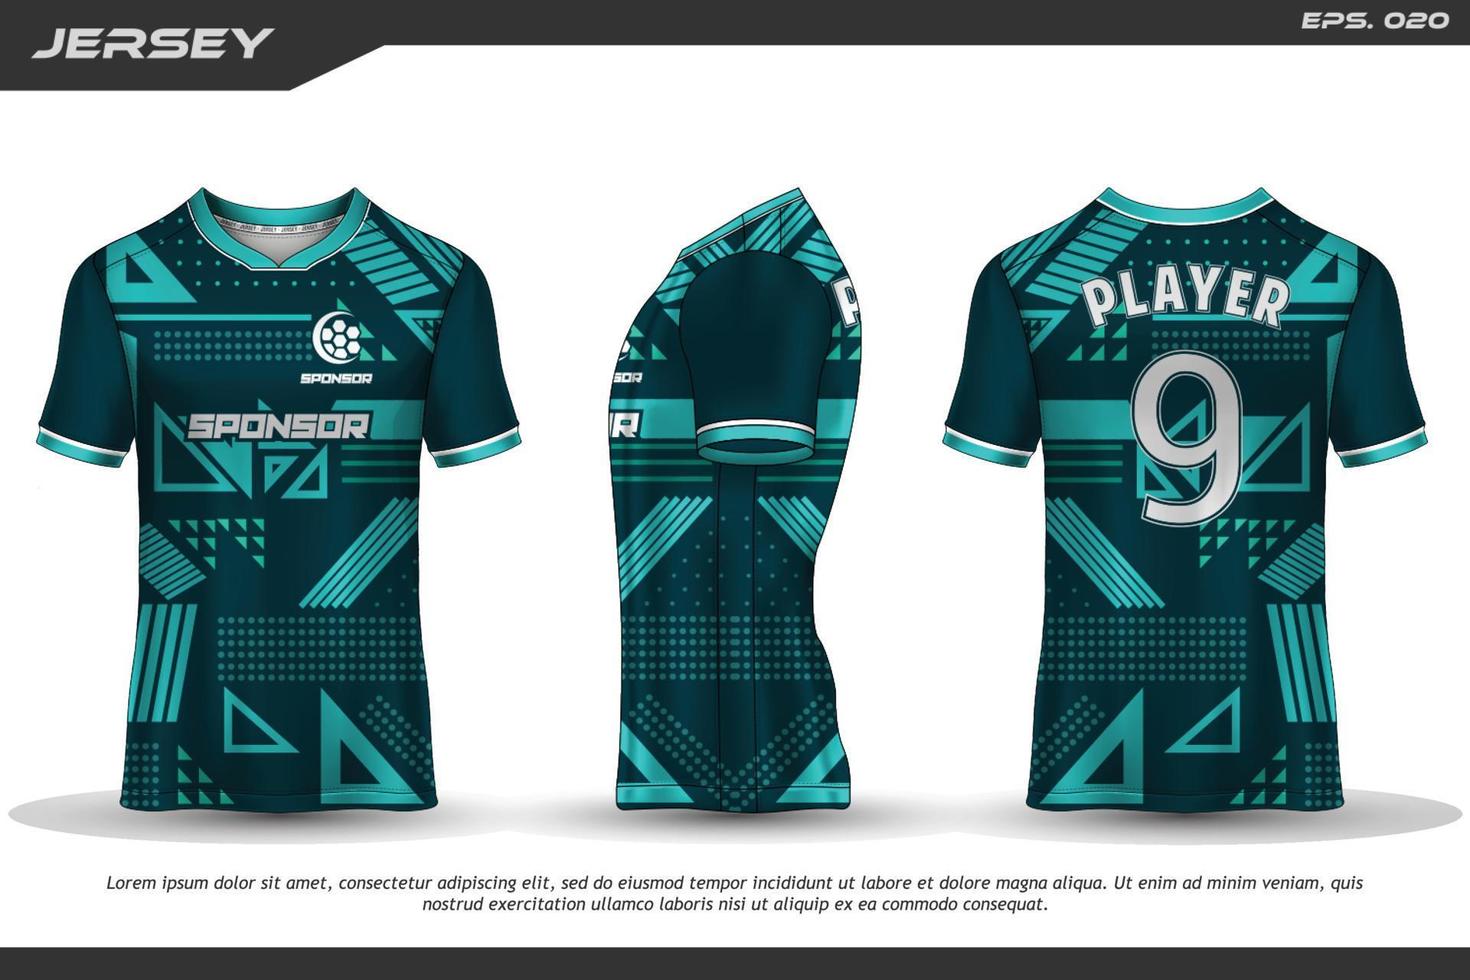 Jersey design sublimation t shirt Premium geometric pattern Incredible Vector collection for Soccer football racing cycling gaming motocross sports